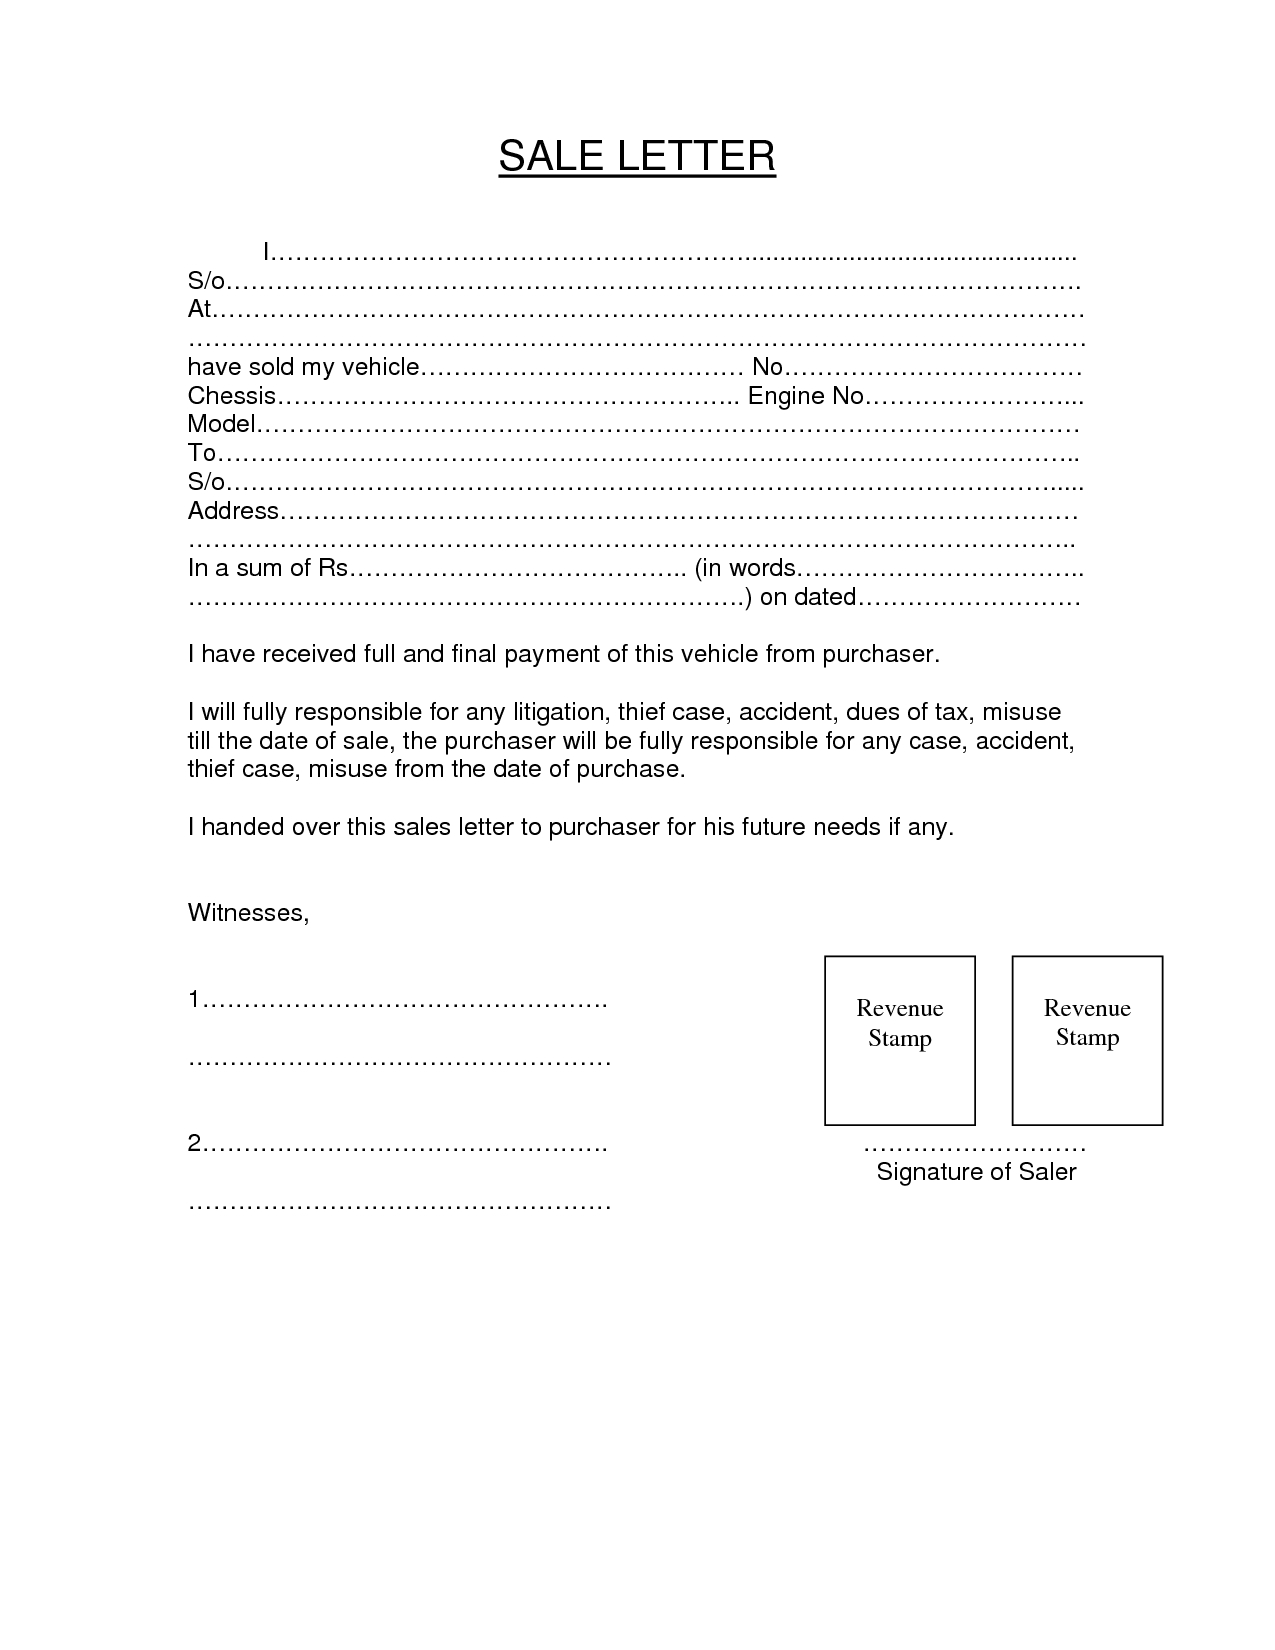 Car Repossession Letter Template - Letter Intent to Sellhicle Car Sale Repossessed Motor Sell